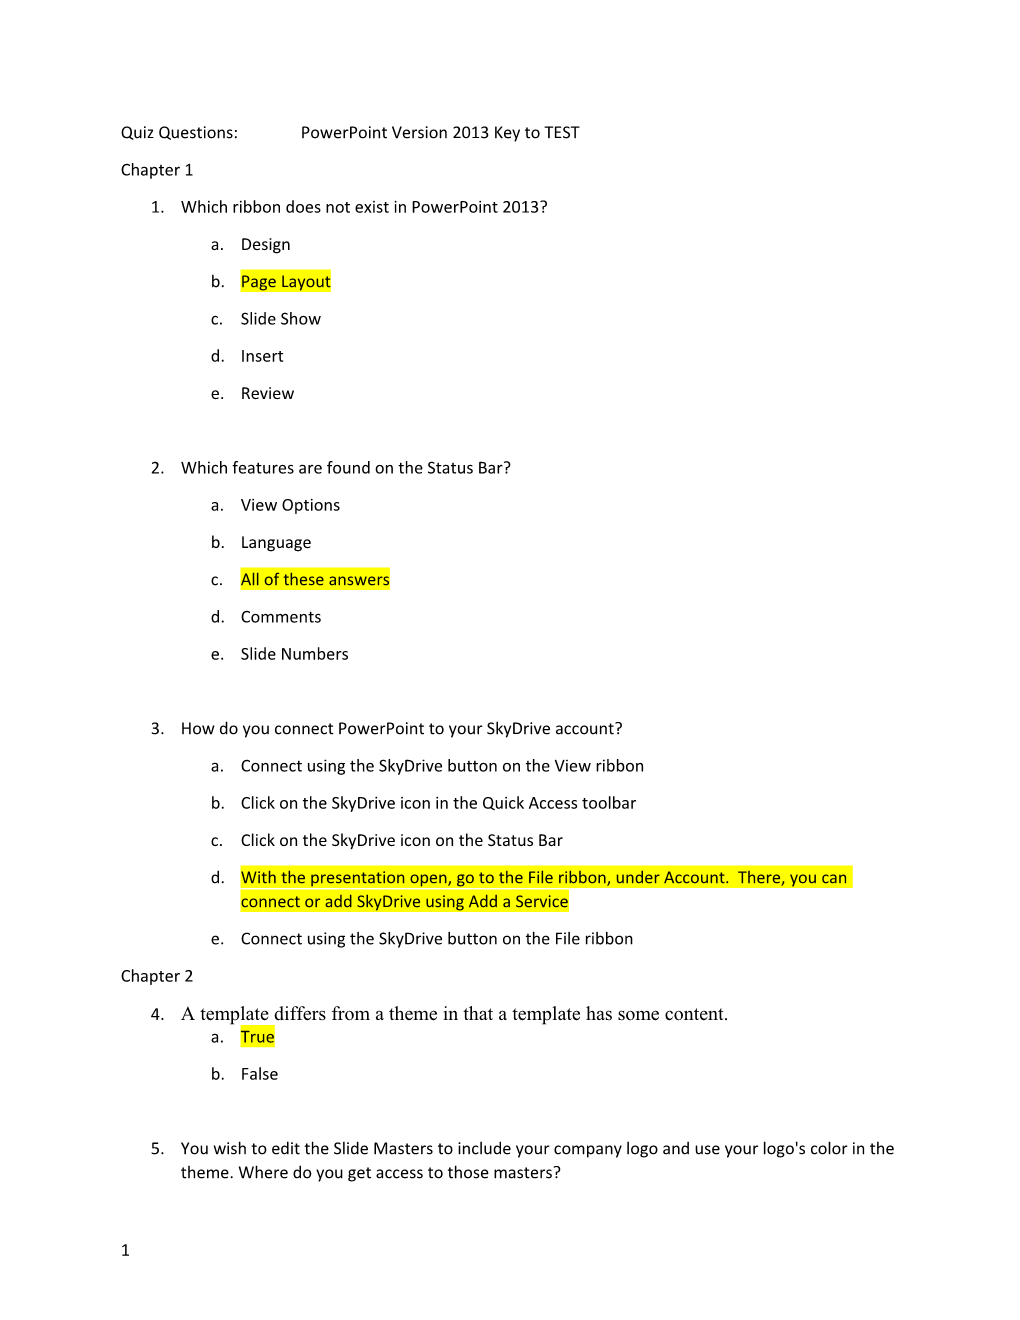 Quiz Questions:Powerpoint Version 2013 Key to TEST